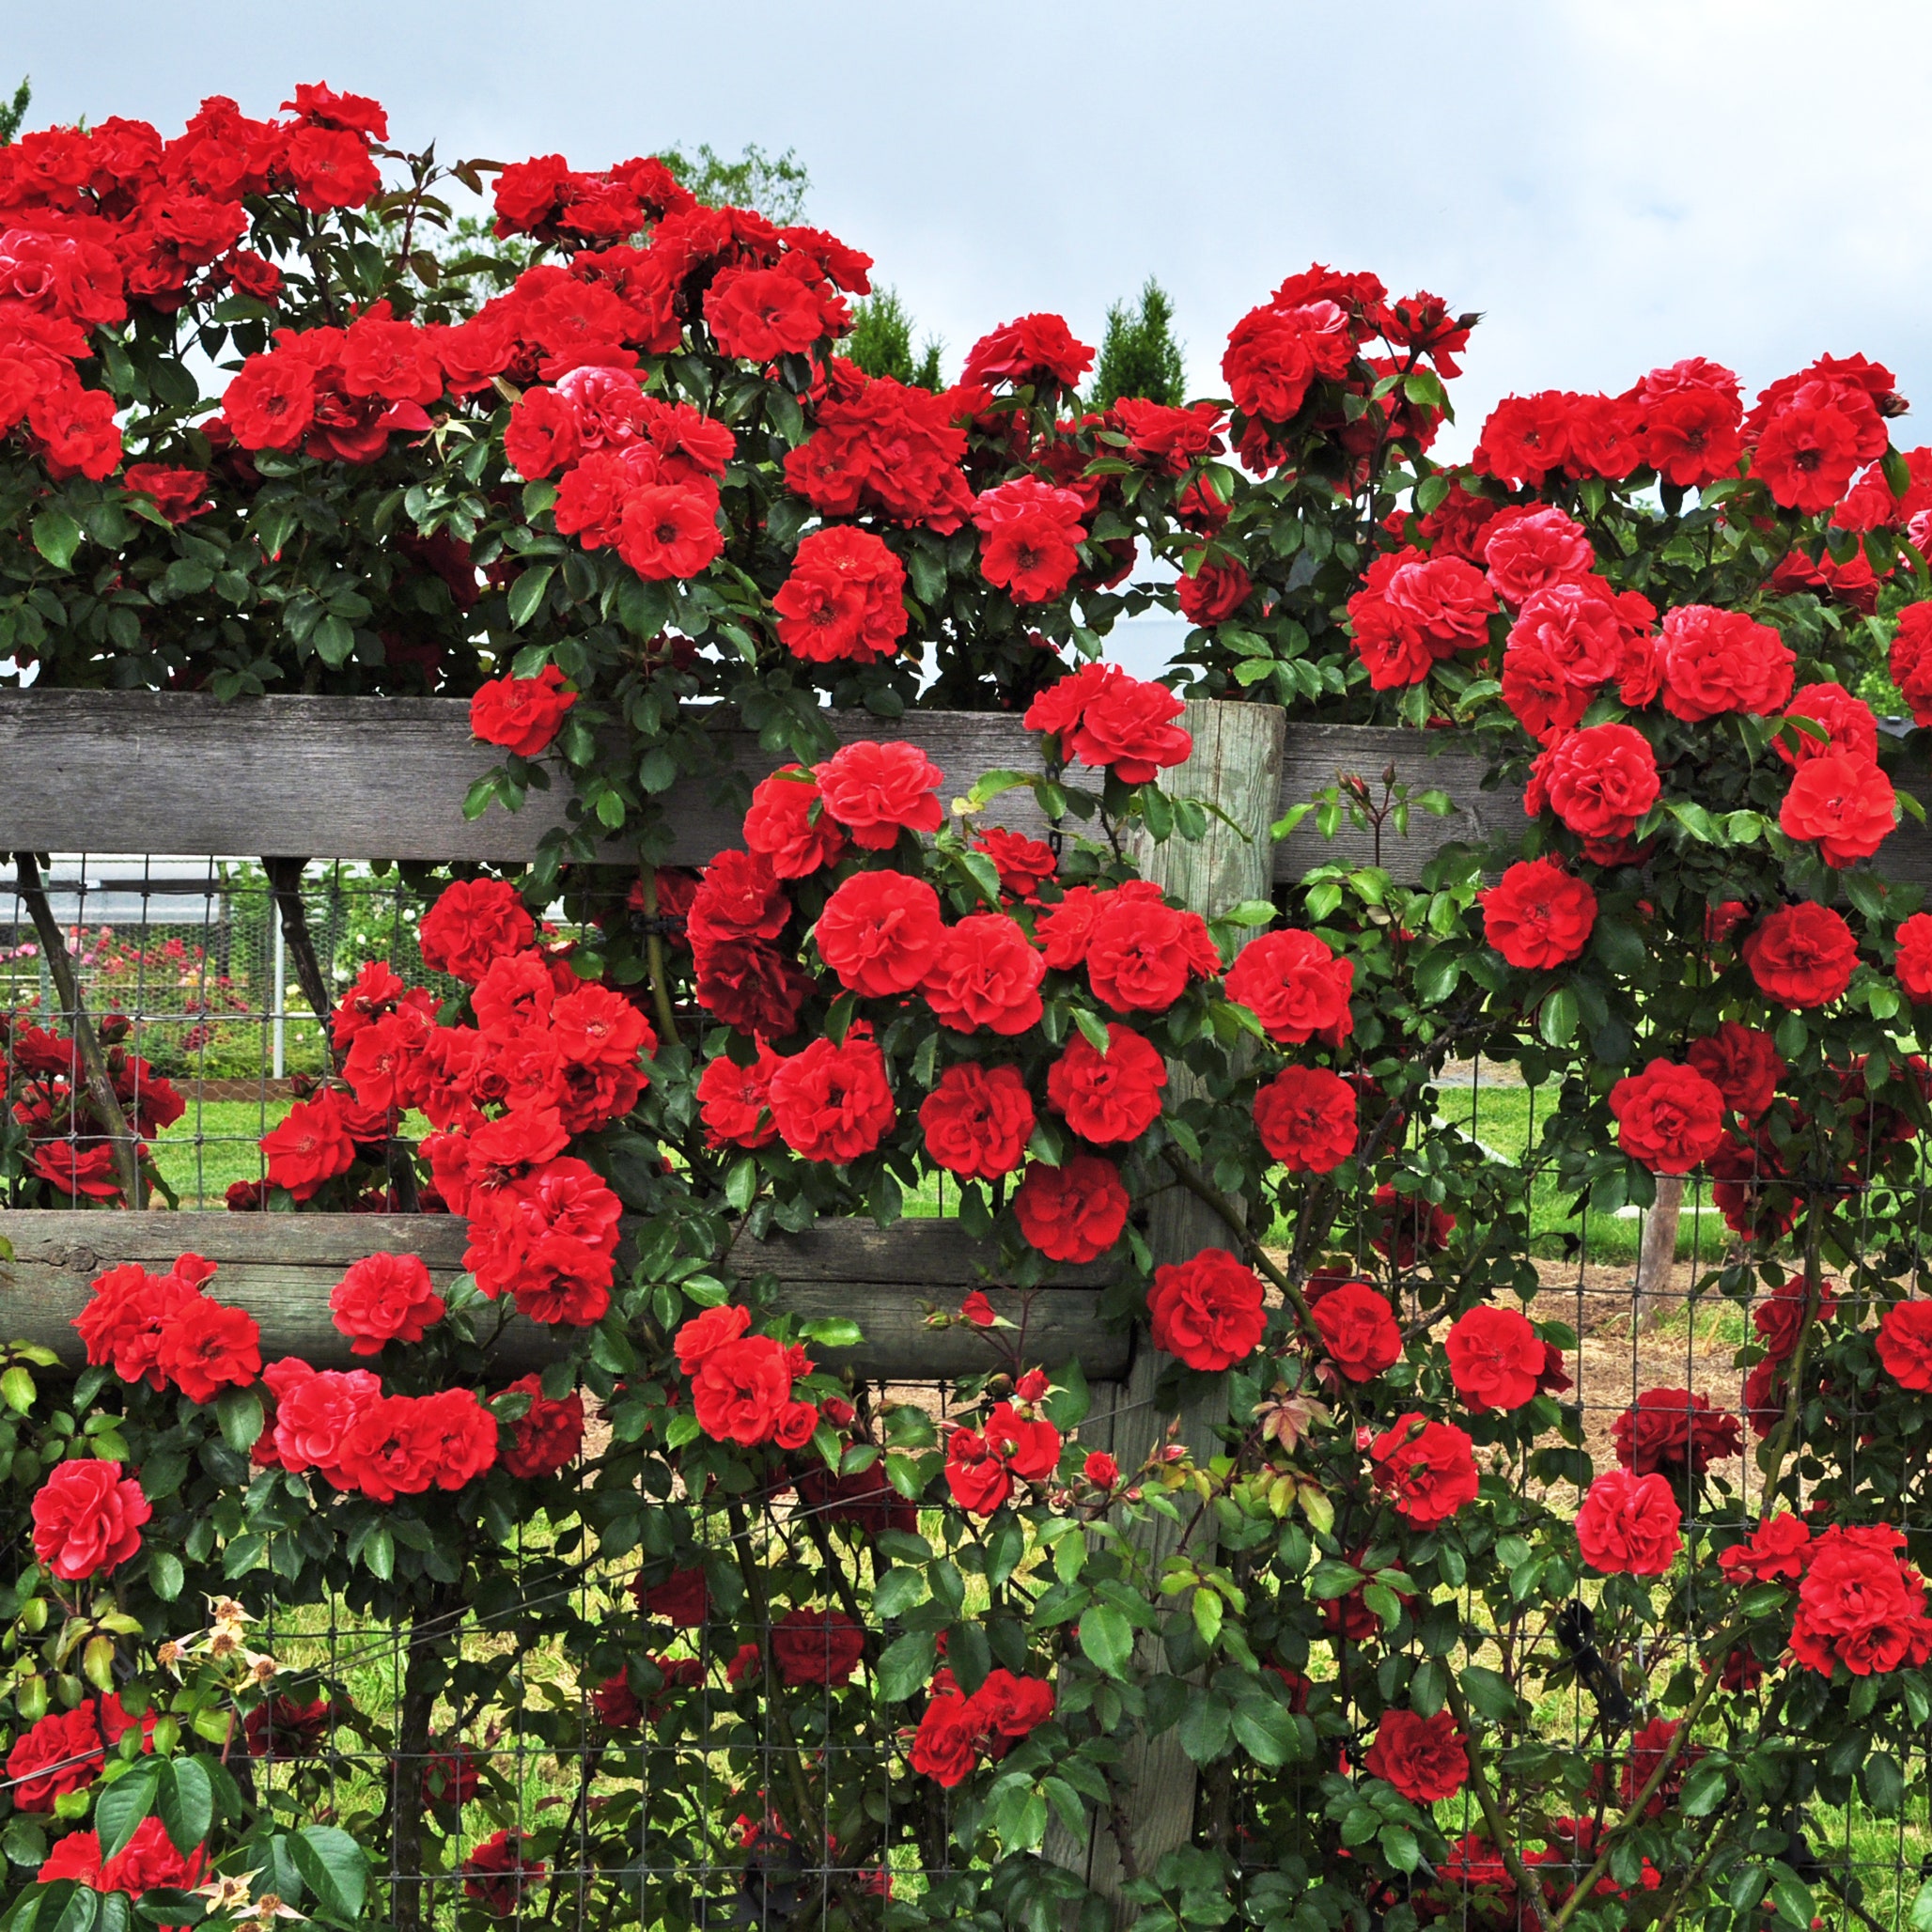 Make the Most of Your Small Space with These Climbing Rose Garden Ideas